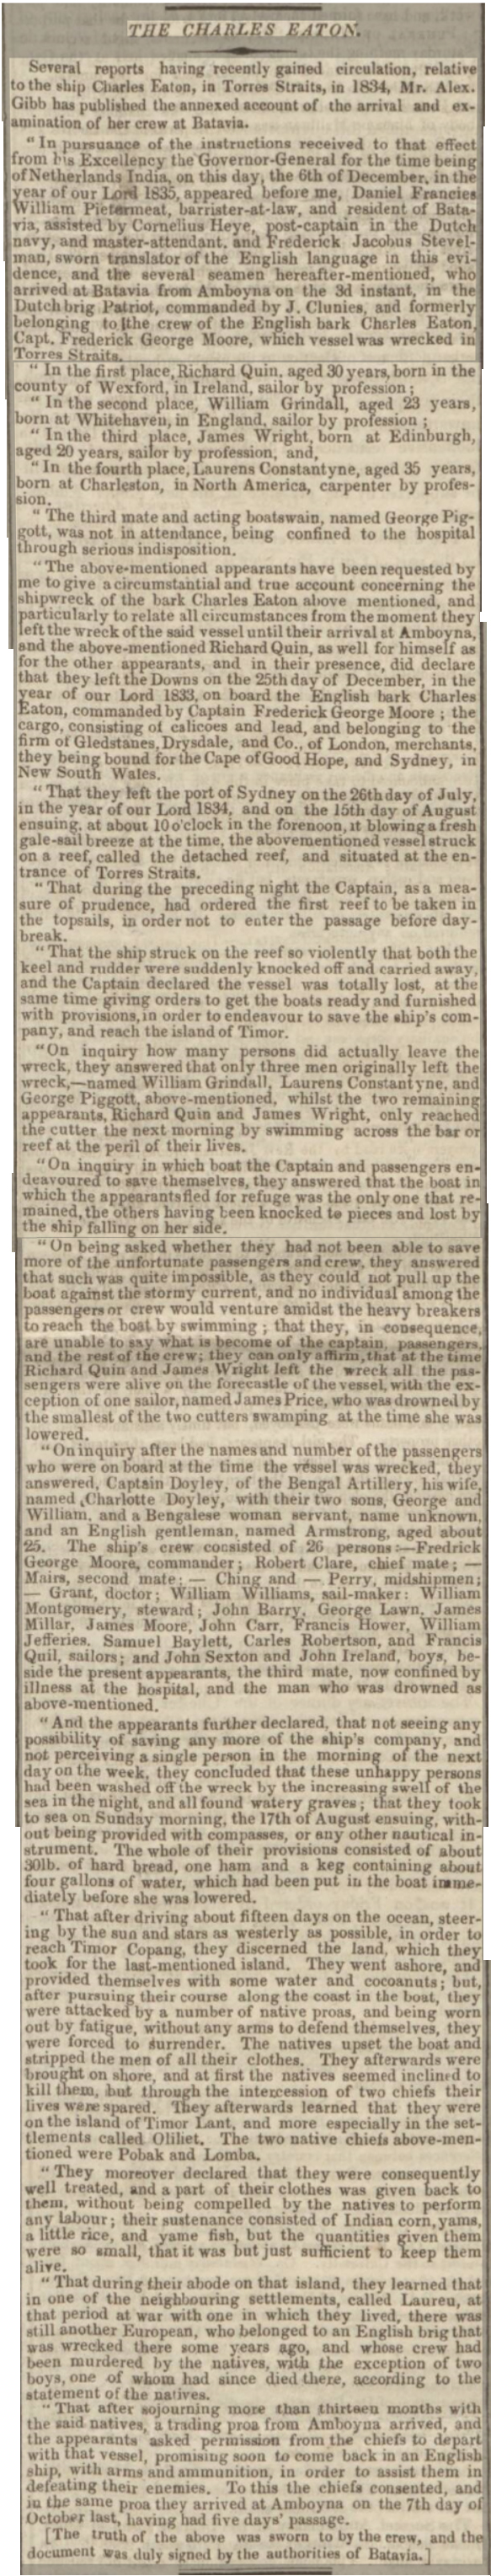 charles-eaton-newspaper-clipping